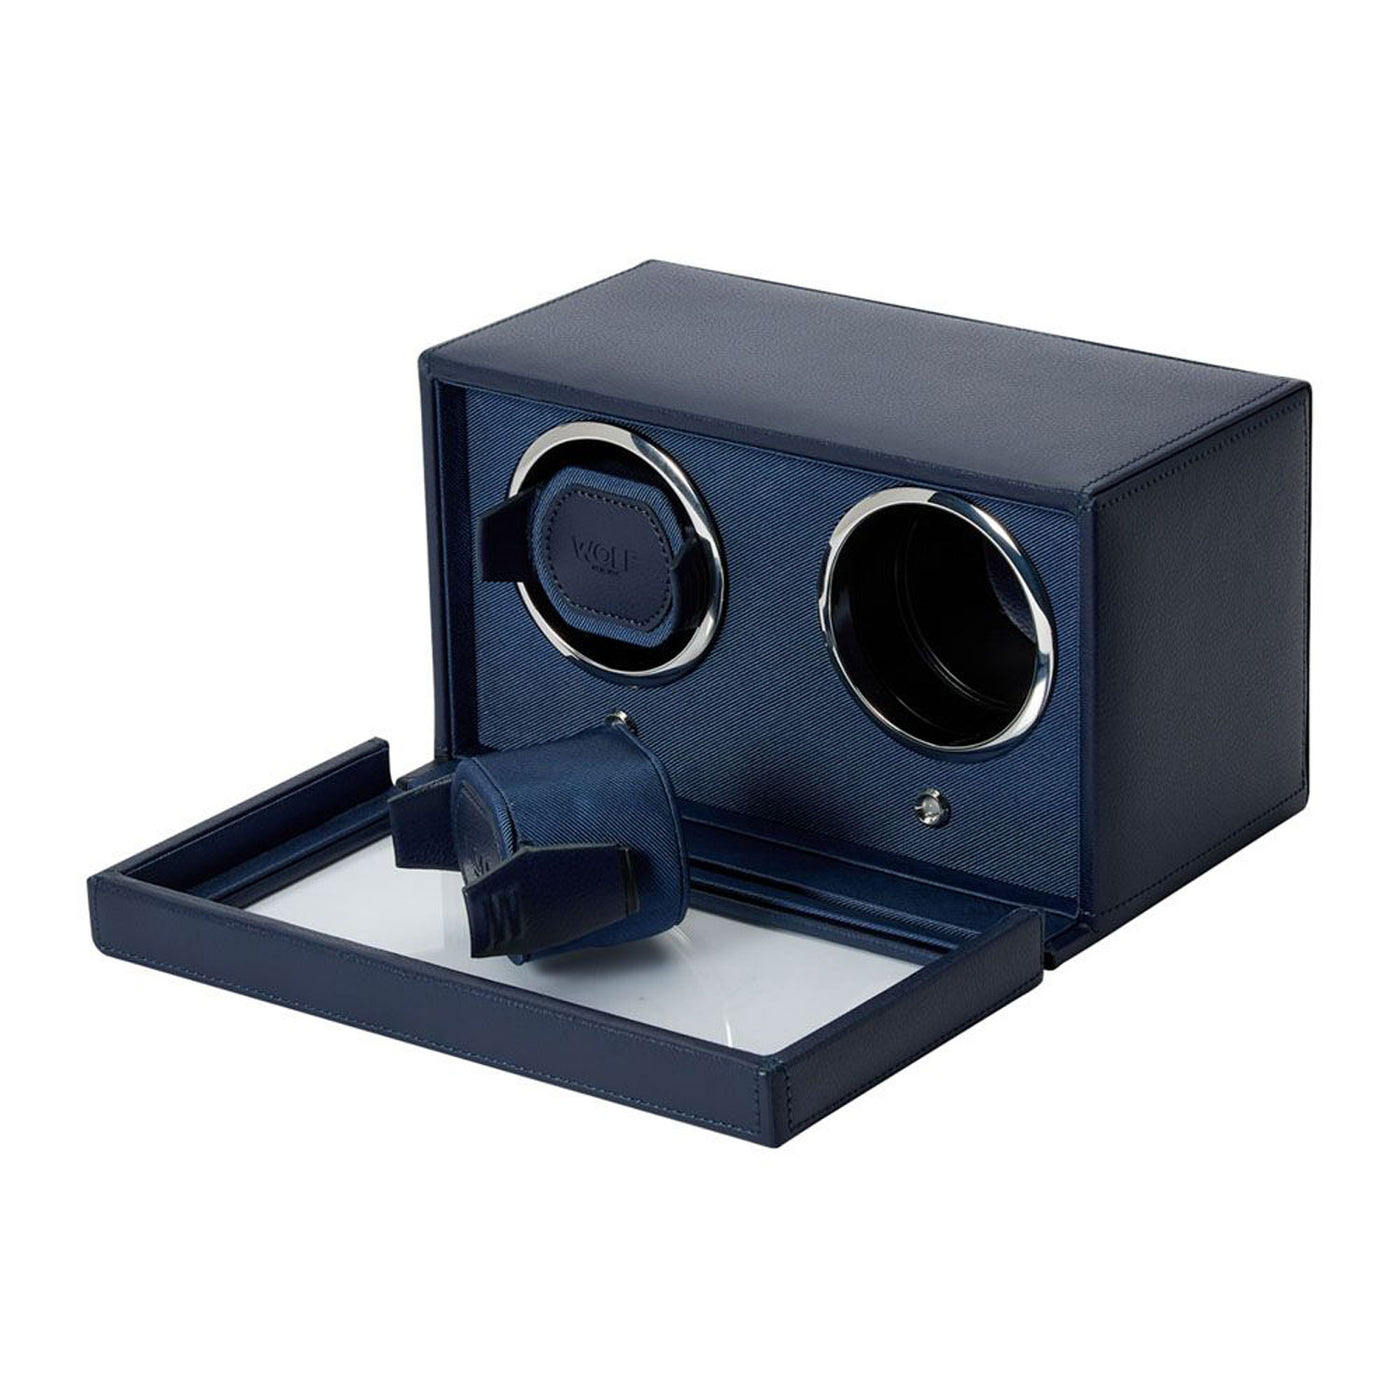 Wolf 1834 Cub Double Watch Winder with cover – 461203